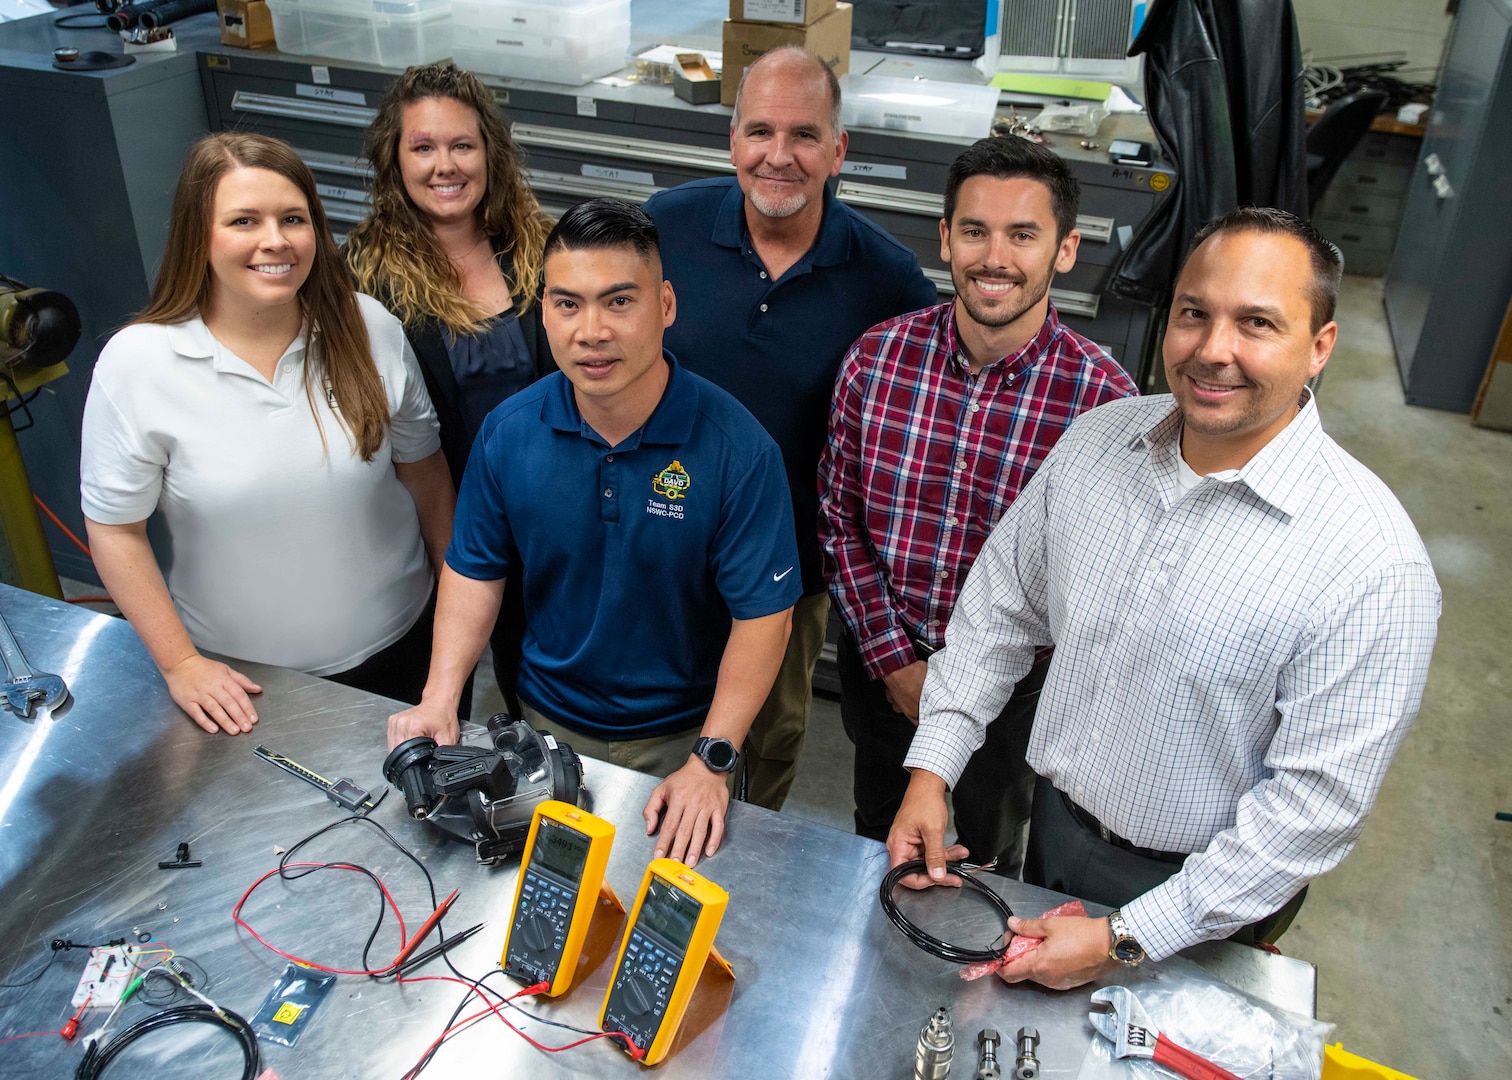 PANAMA CITY, Florida - The LED Air Warning System team from Naval Surface Warfare Center Panama City Division, in collaboration with local academia and an industry partner, has been selected by the Federal Laboratory Consortium to receive one of its highest honors – a 2019 Excellence in Technology Transfer. Award. Pictured from left to right: Paige George, Allie Williams, Tien Le, Dennis Gallagher, Hayden DeForge, and Brian Wentworth. U.S. Navy phoot by Eddie Green